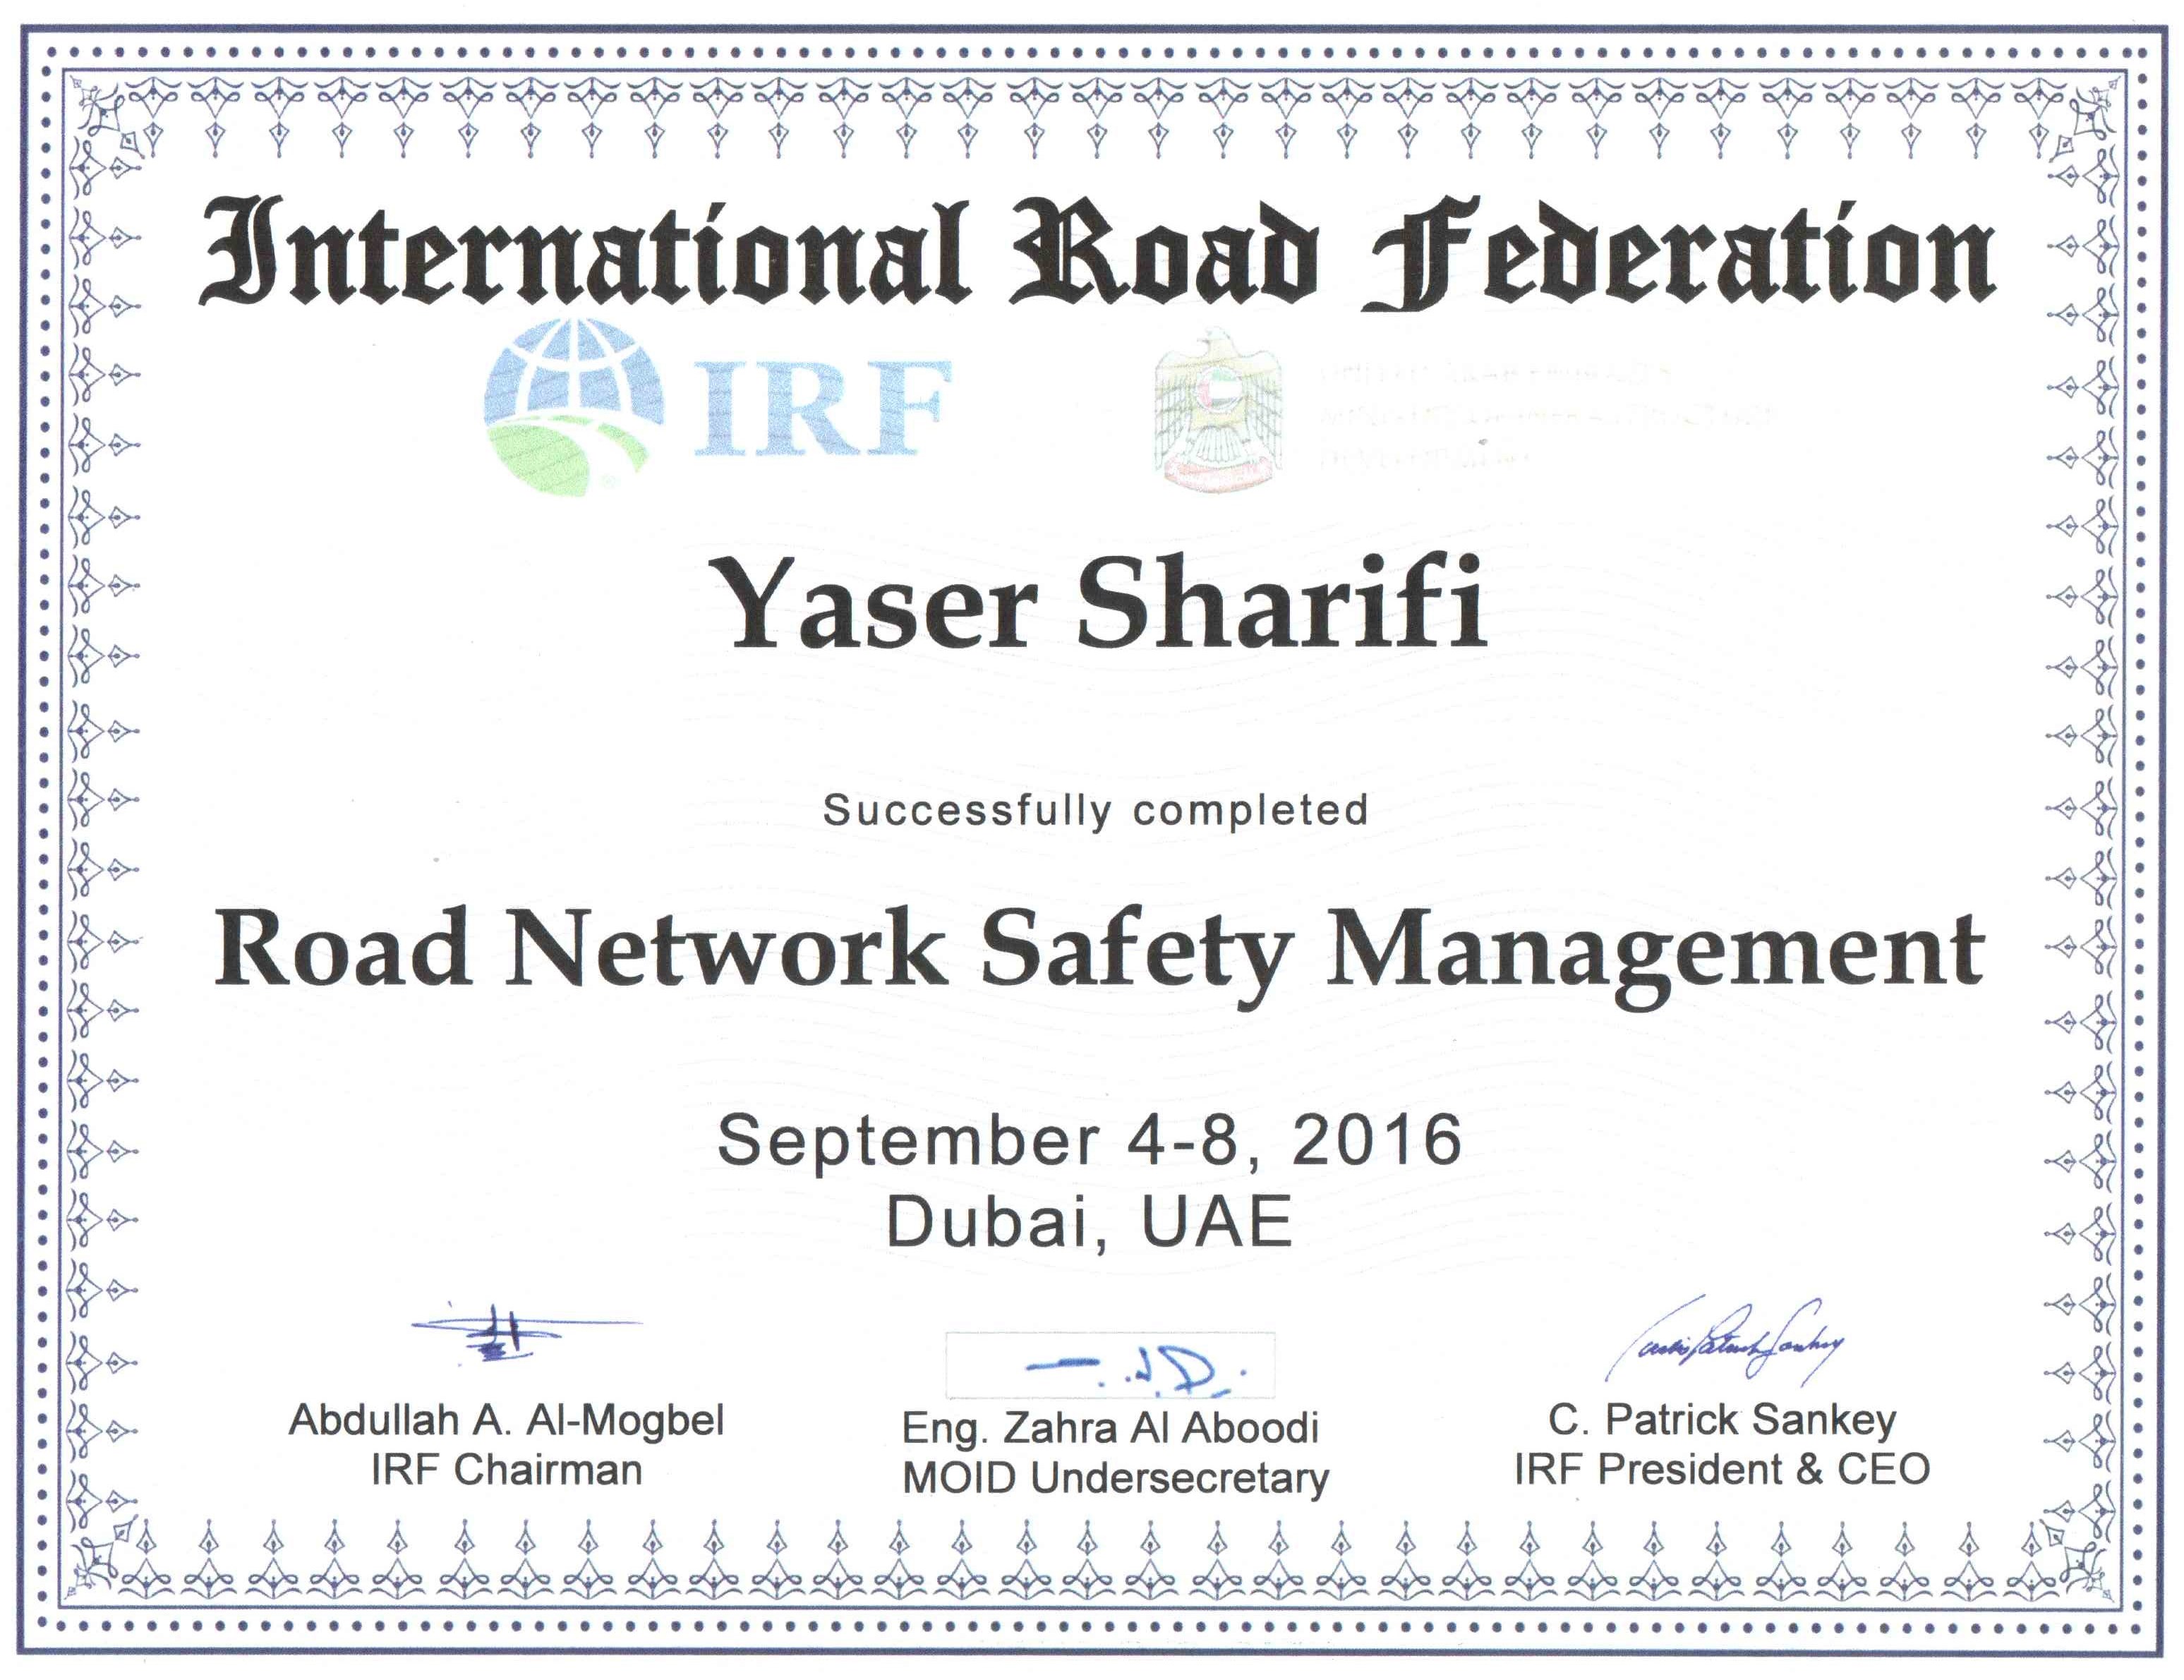 Certificate of International Road Federation(IRF) 